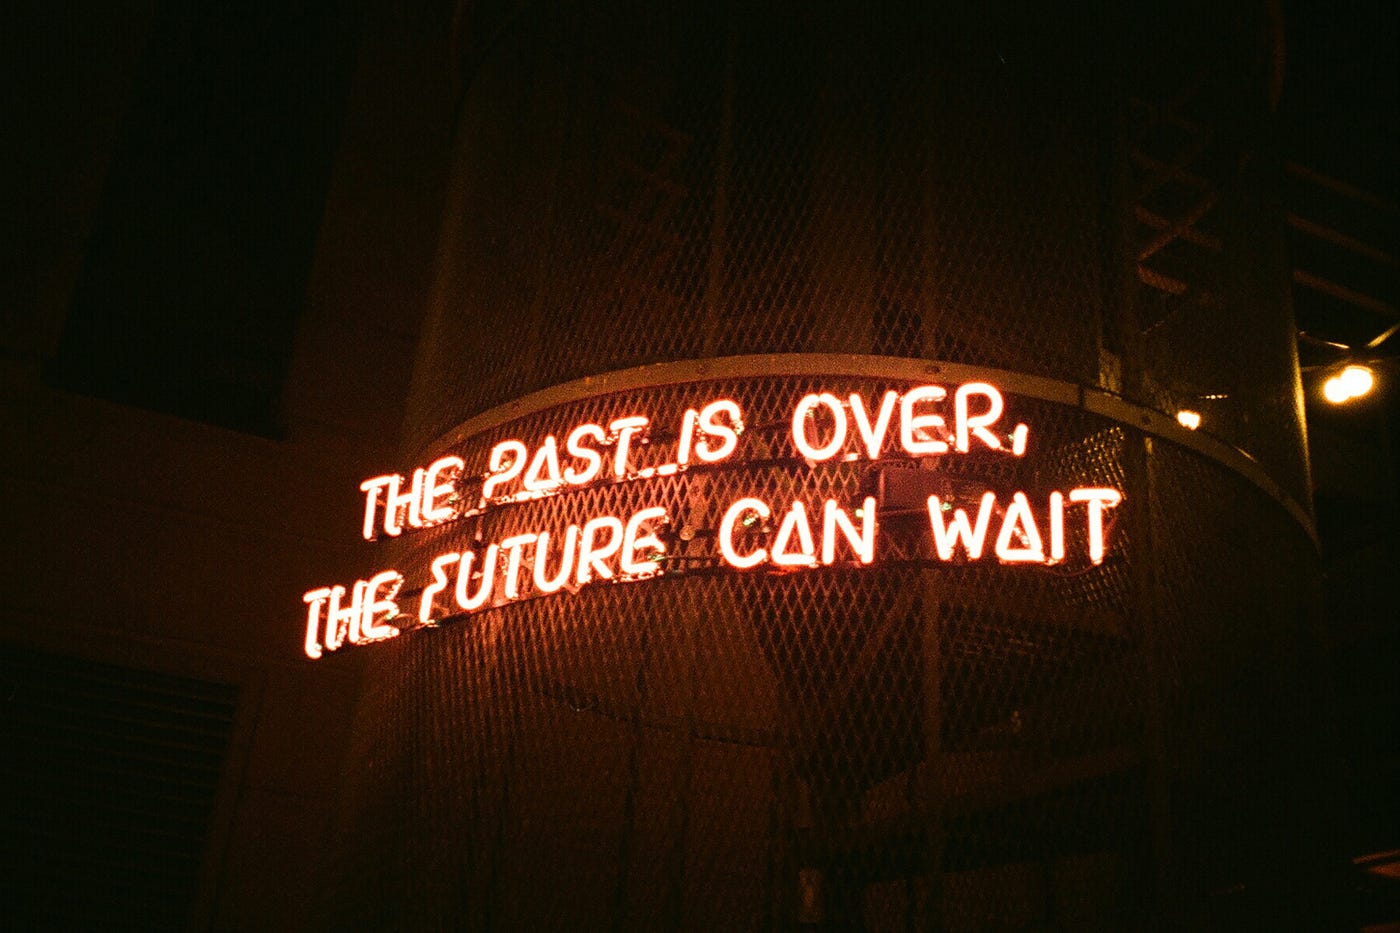 The Past is Over, the Future can Wait